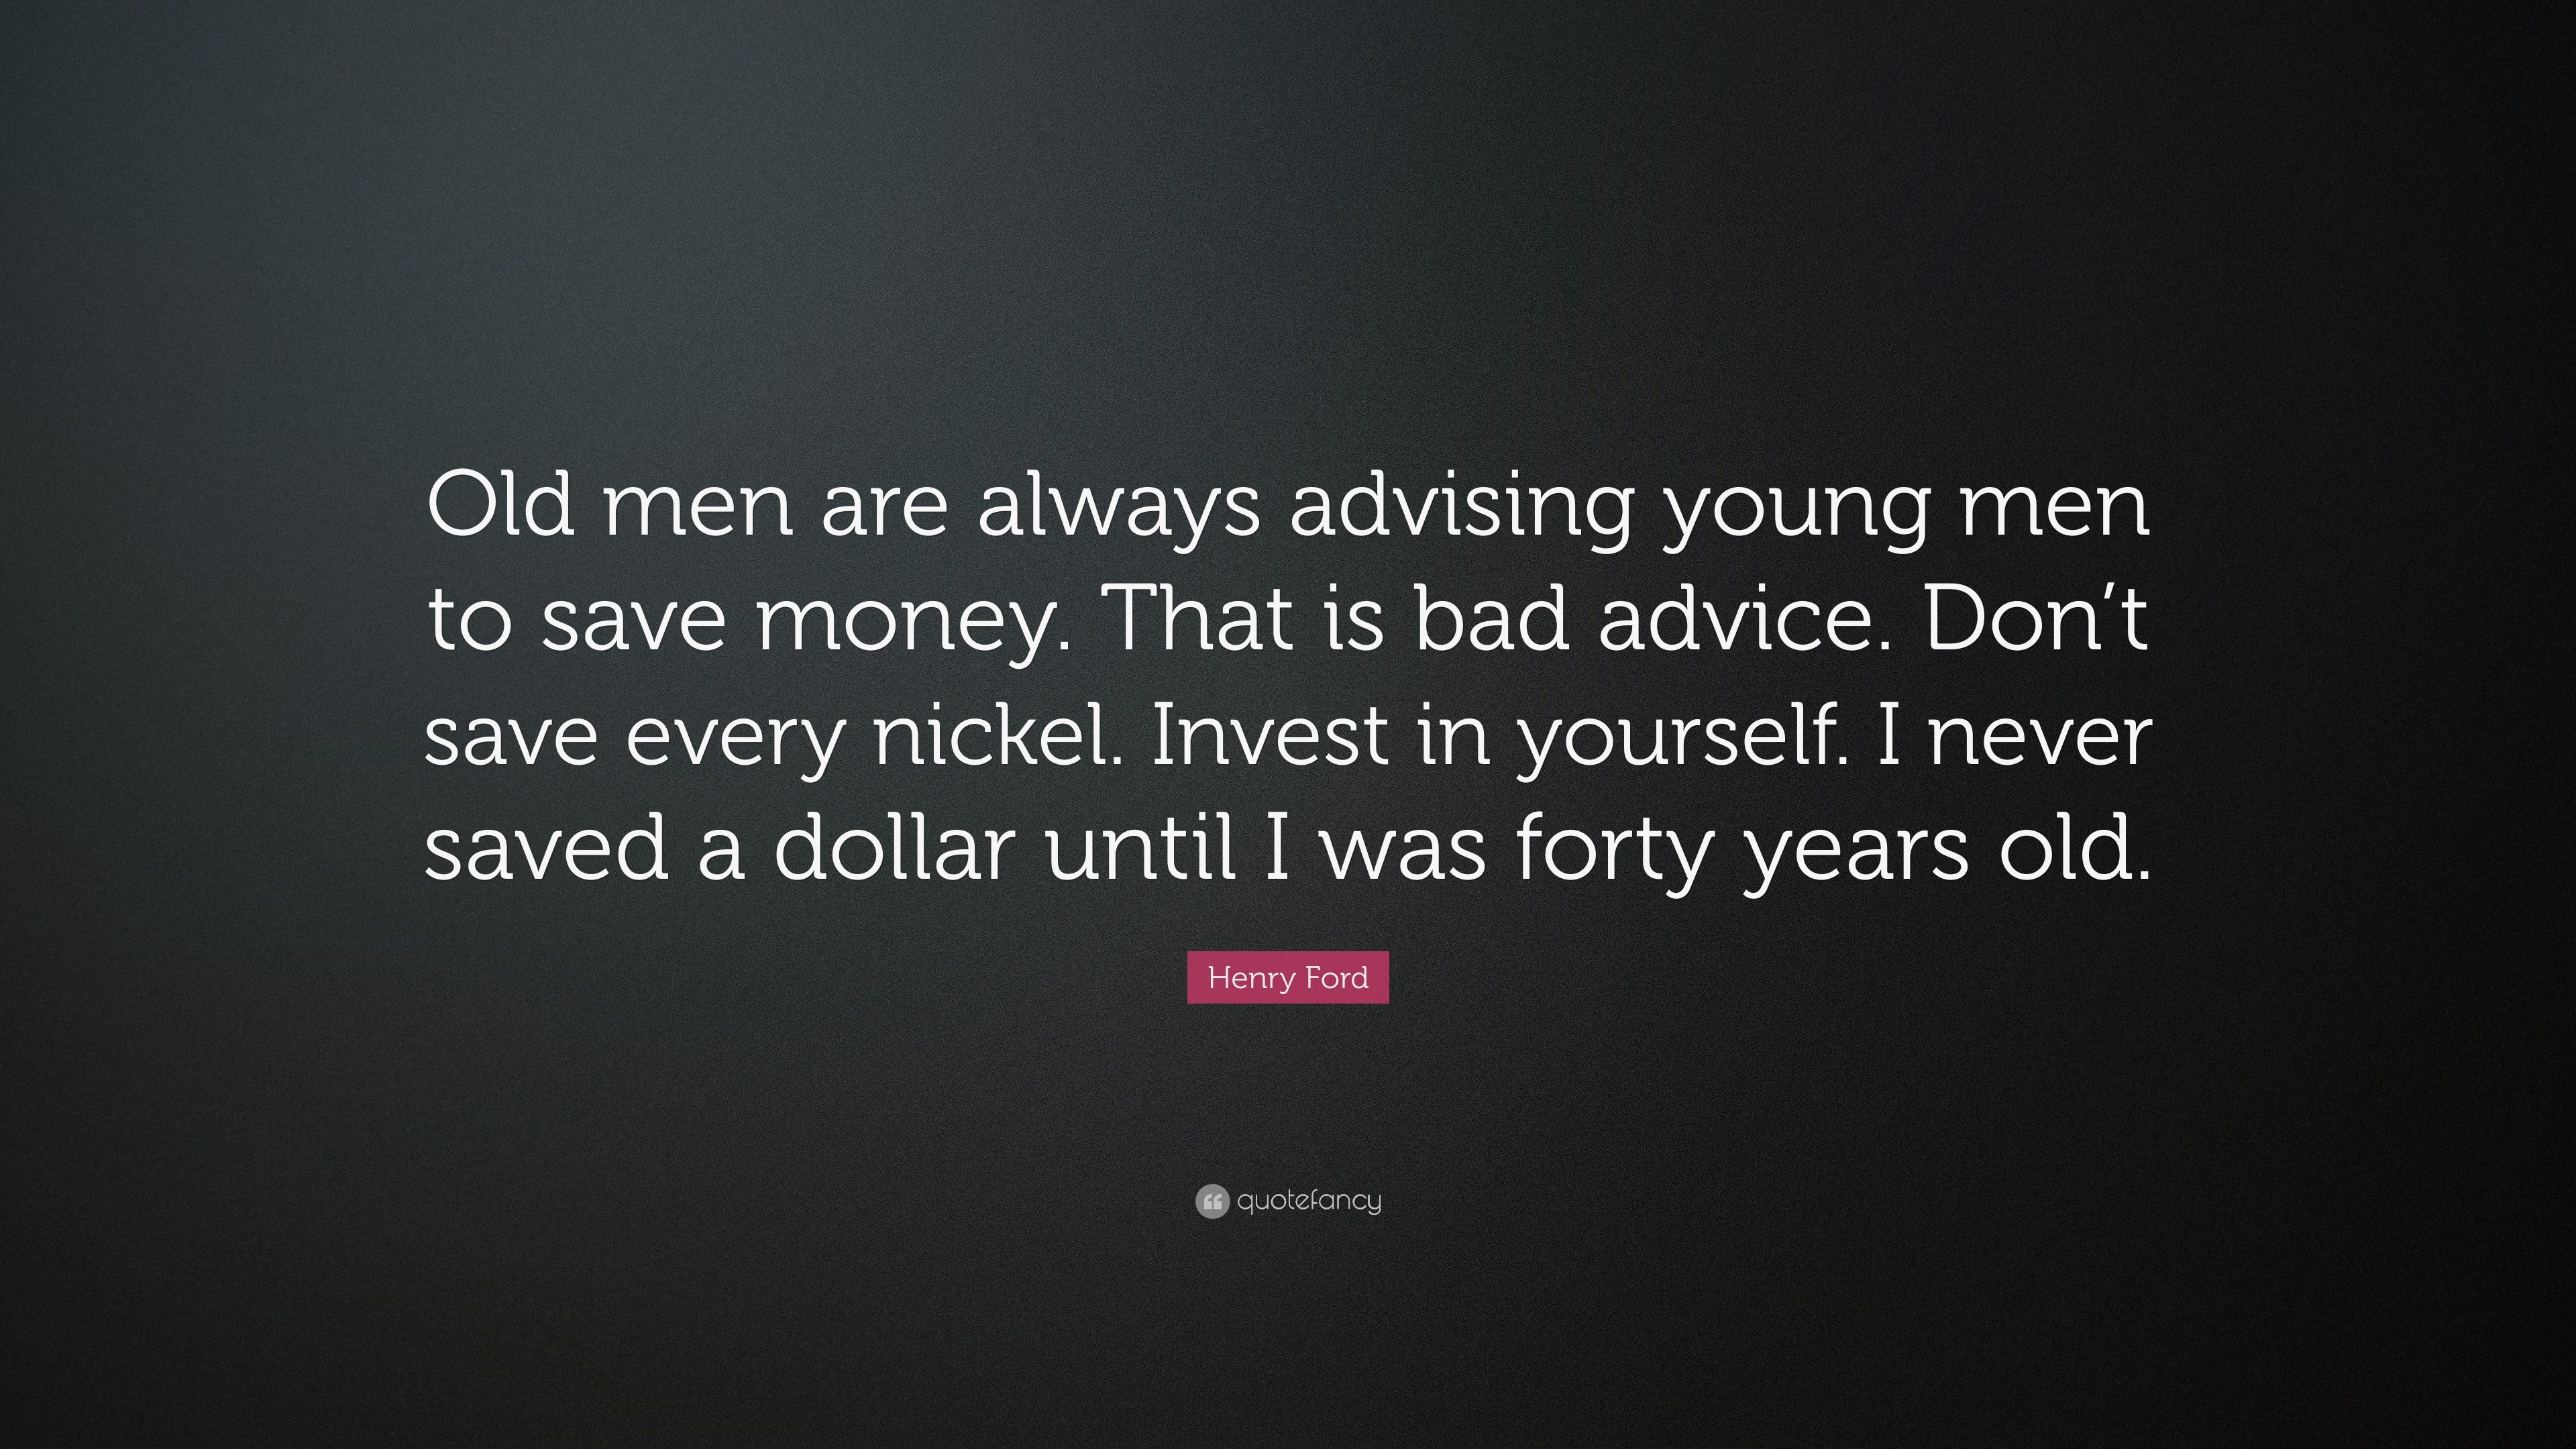 Henry Ford Quote: “Old men are always advising young men to save money. That is bad advice. Don't save every nickel. Invest in yourself. I .” (12 wallpaper)